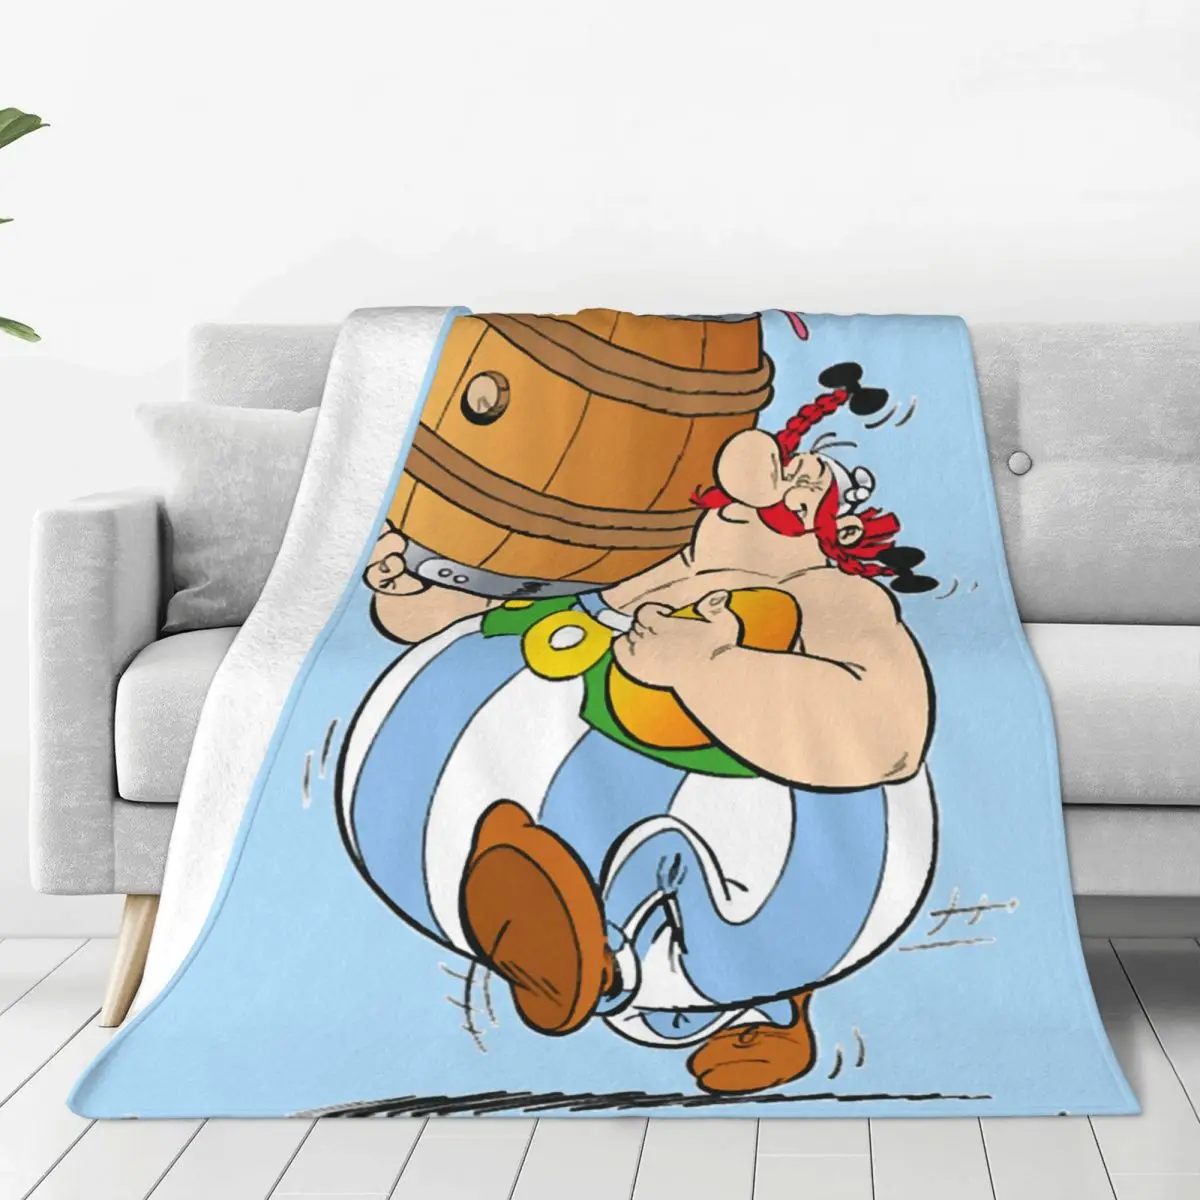 

Asterix & Obelix These Rugbymen Rugby Are Crazy Blanket Cover Wool Throw Blanket Summer Air Conditioning Soft Warm Bedsprea